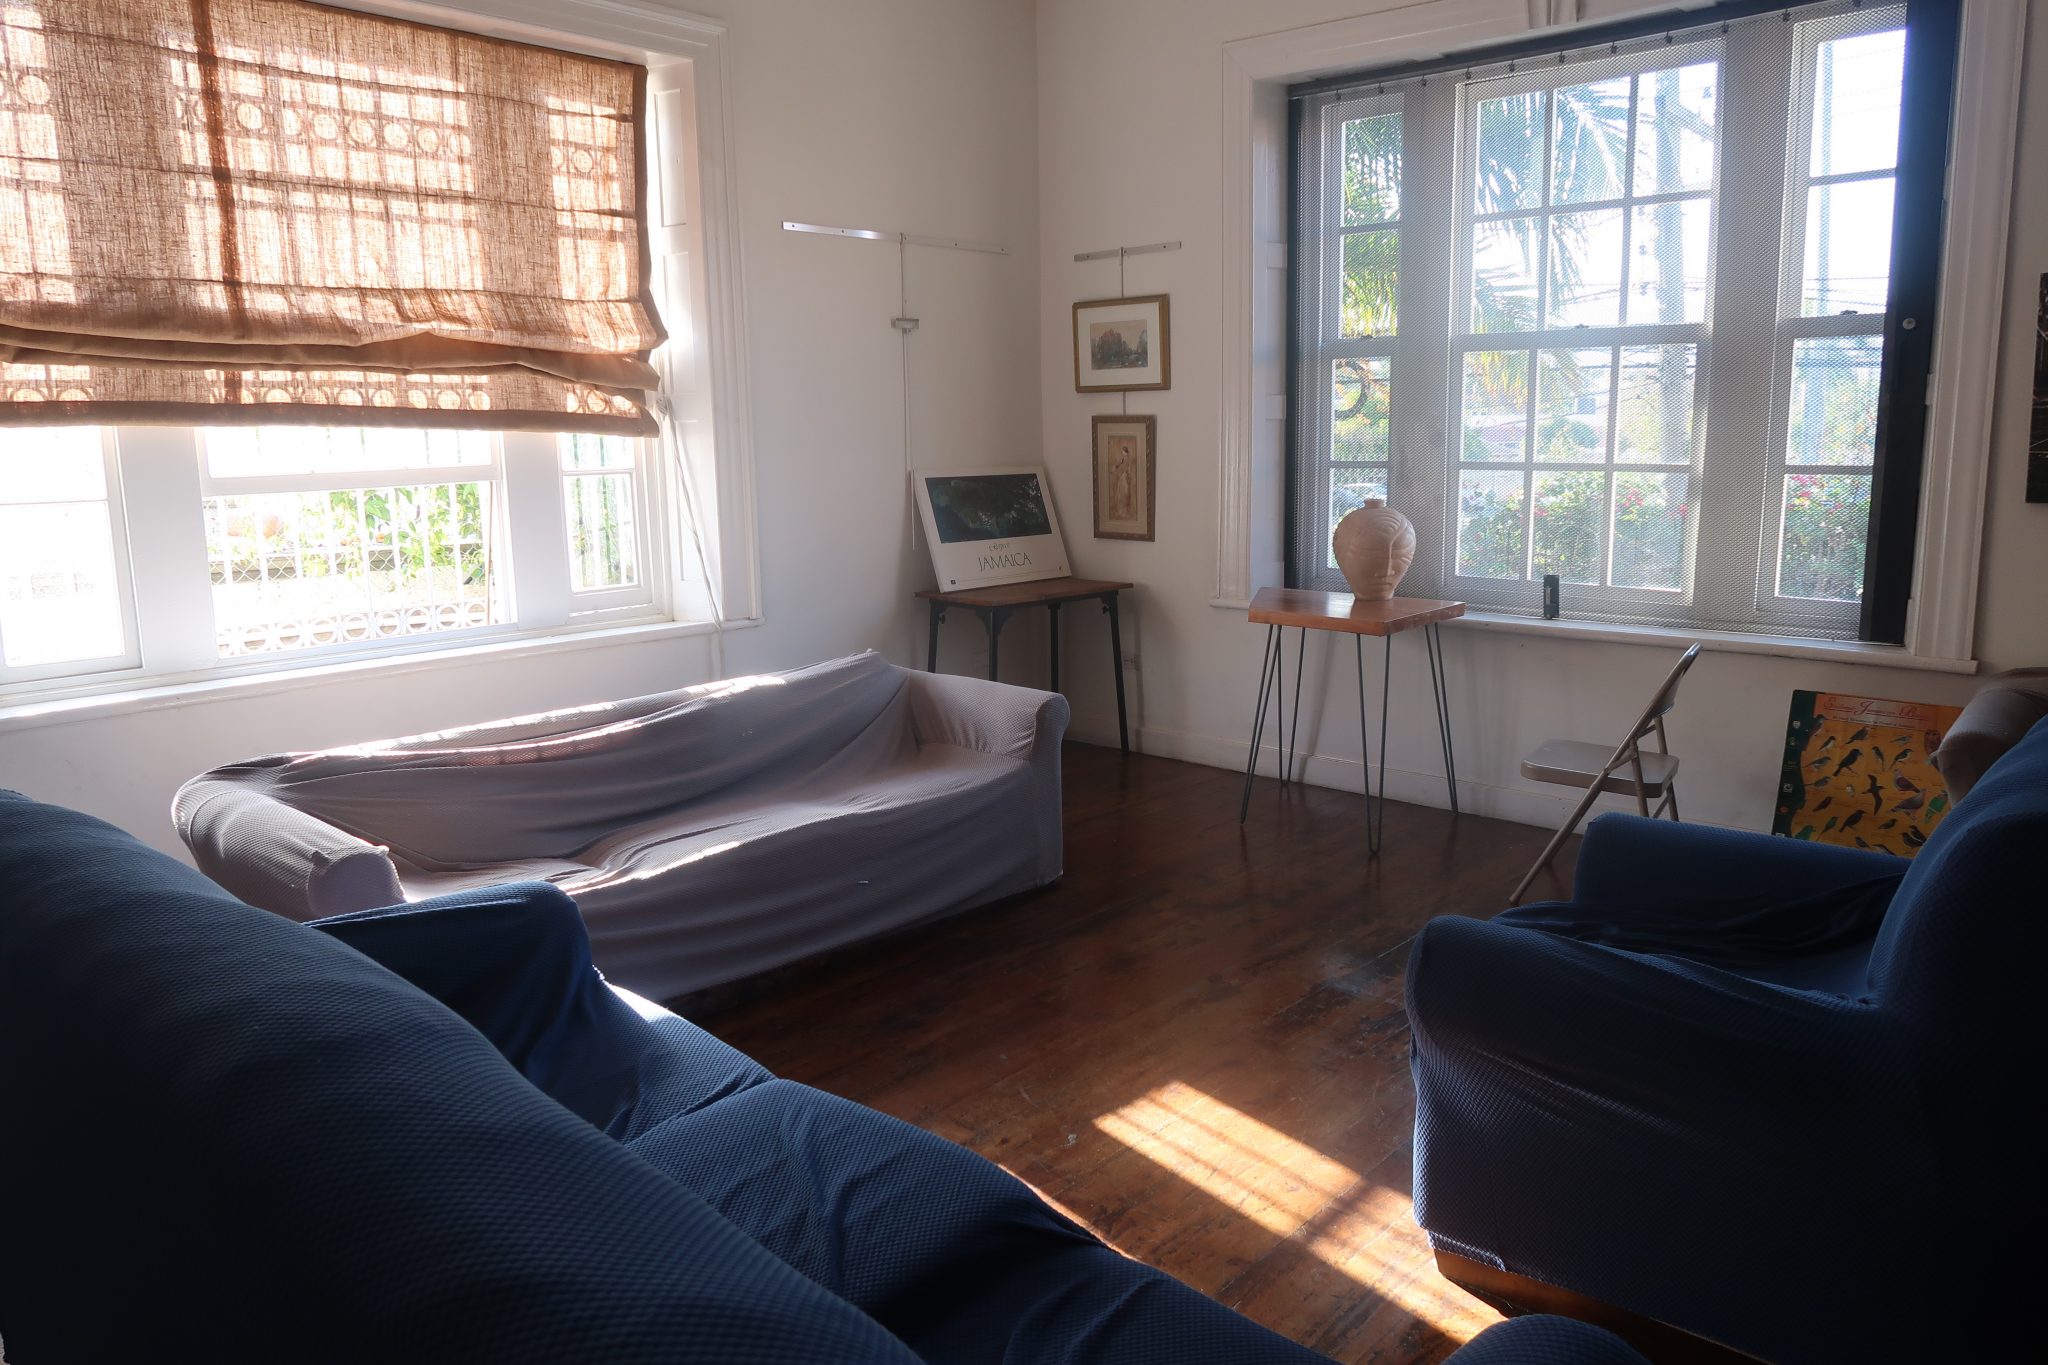 A community living room at Mobay Kotch hostel in Jamaica features two couches and an arm chair for guests to sit and relax in during their stay.